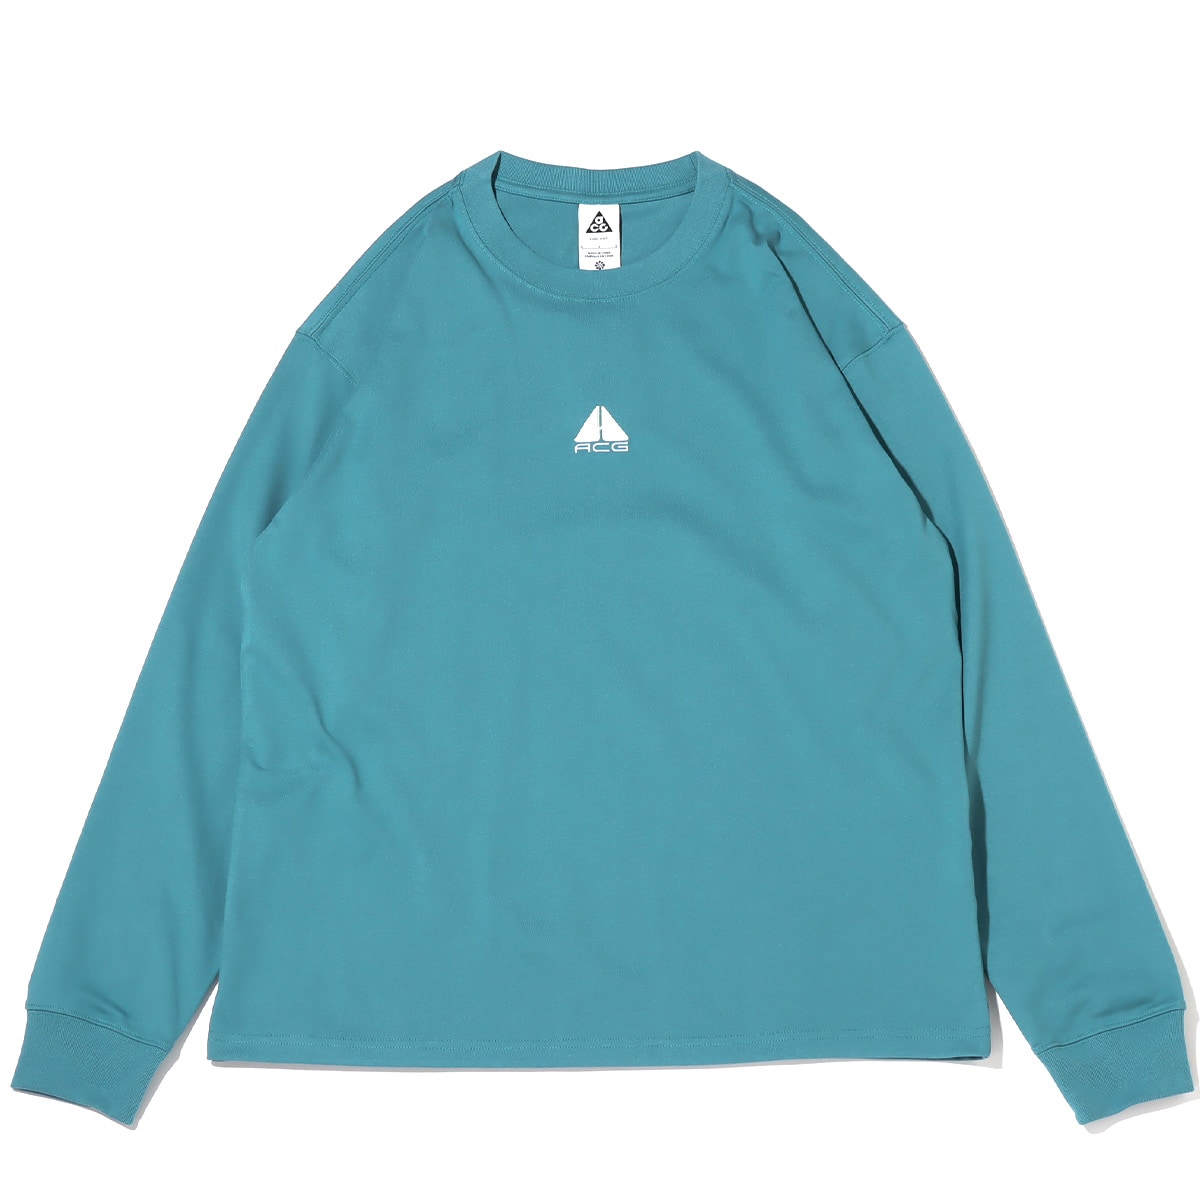 NIKE AS M NRG ACG LS LBR TEE LUNGS MINERAL TEAL/LIGHT SILVER ...